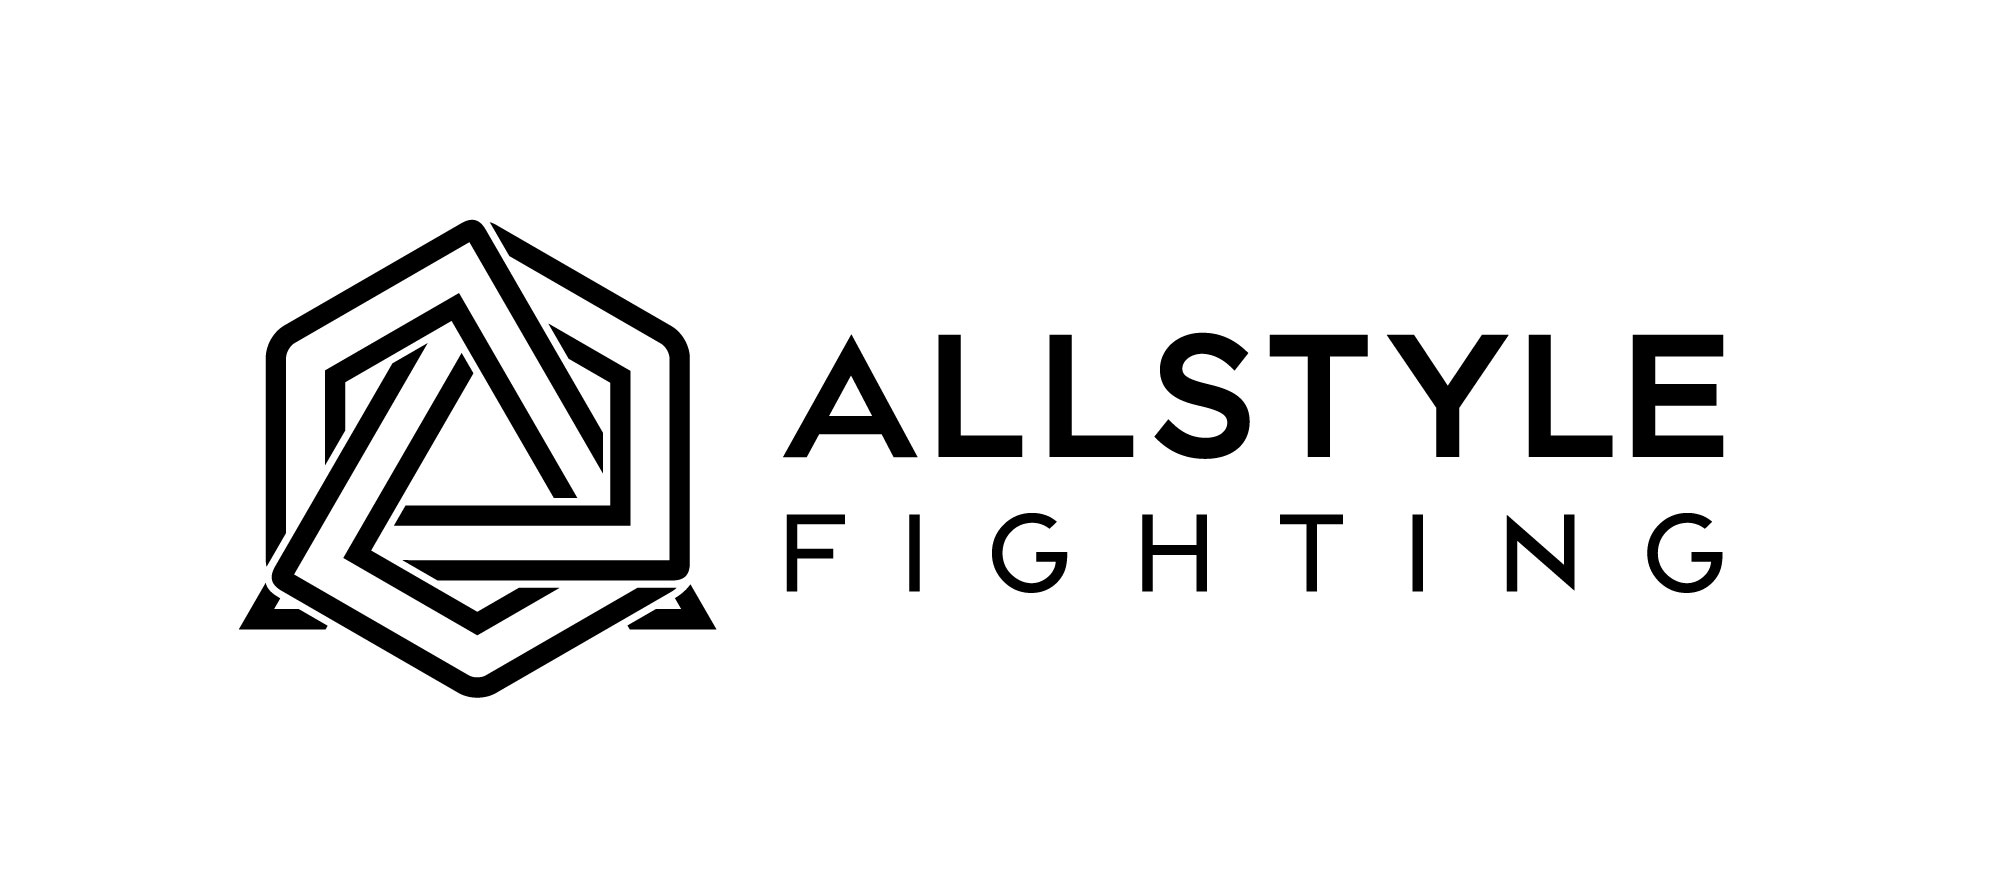 ALLSTYLE FIGHTING